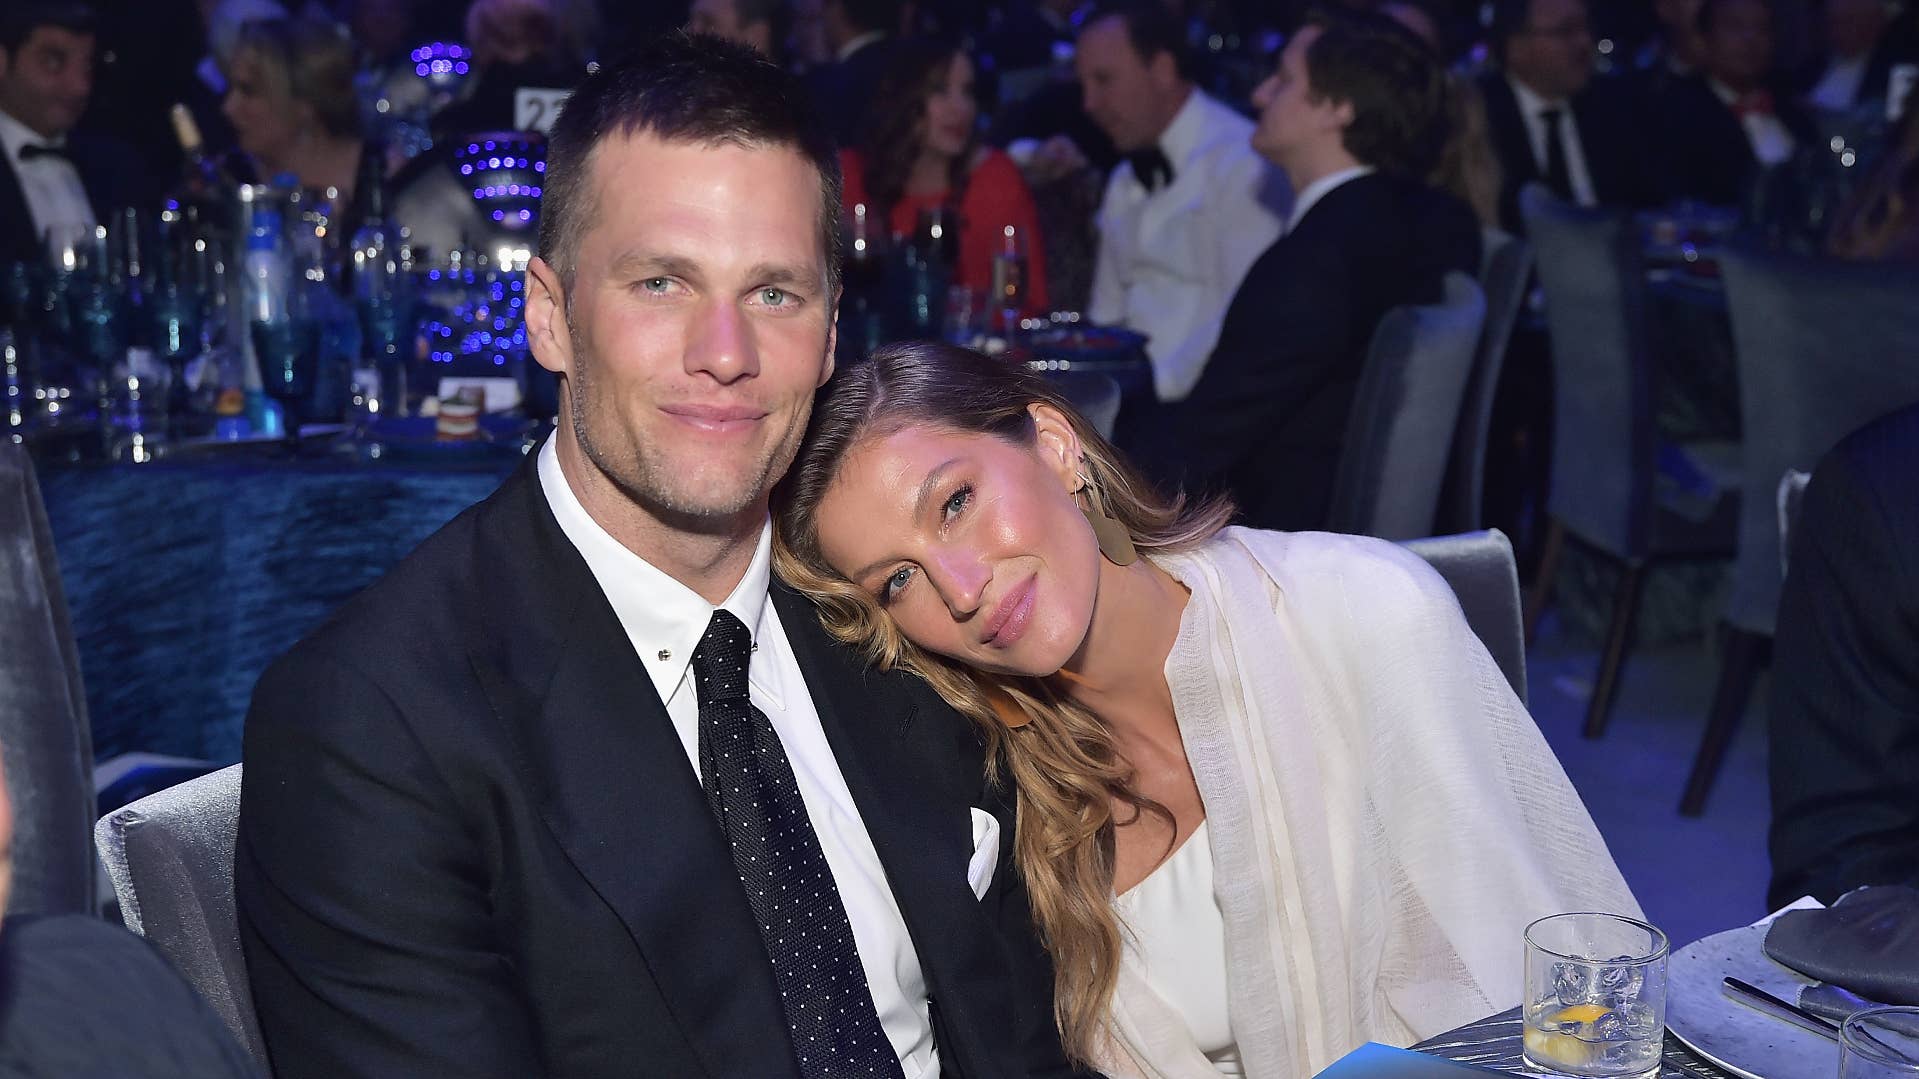 Tom Brady and Gisele Bündchen attend the 2019 Hollywood for Science Gala.